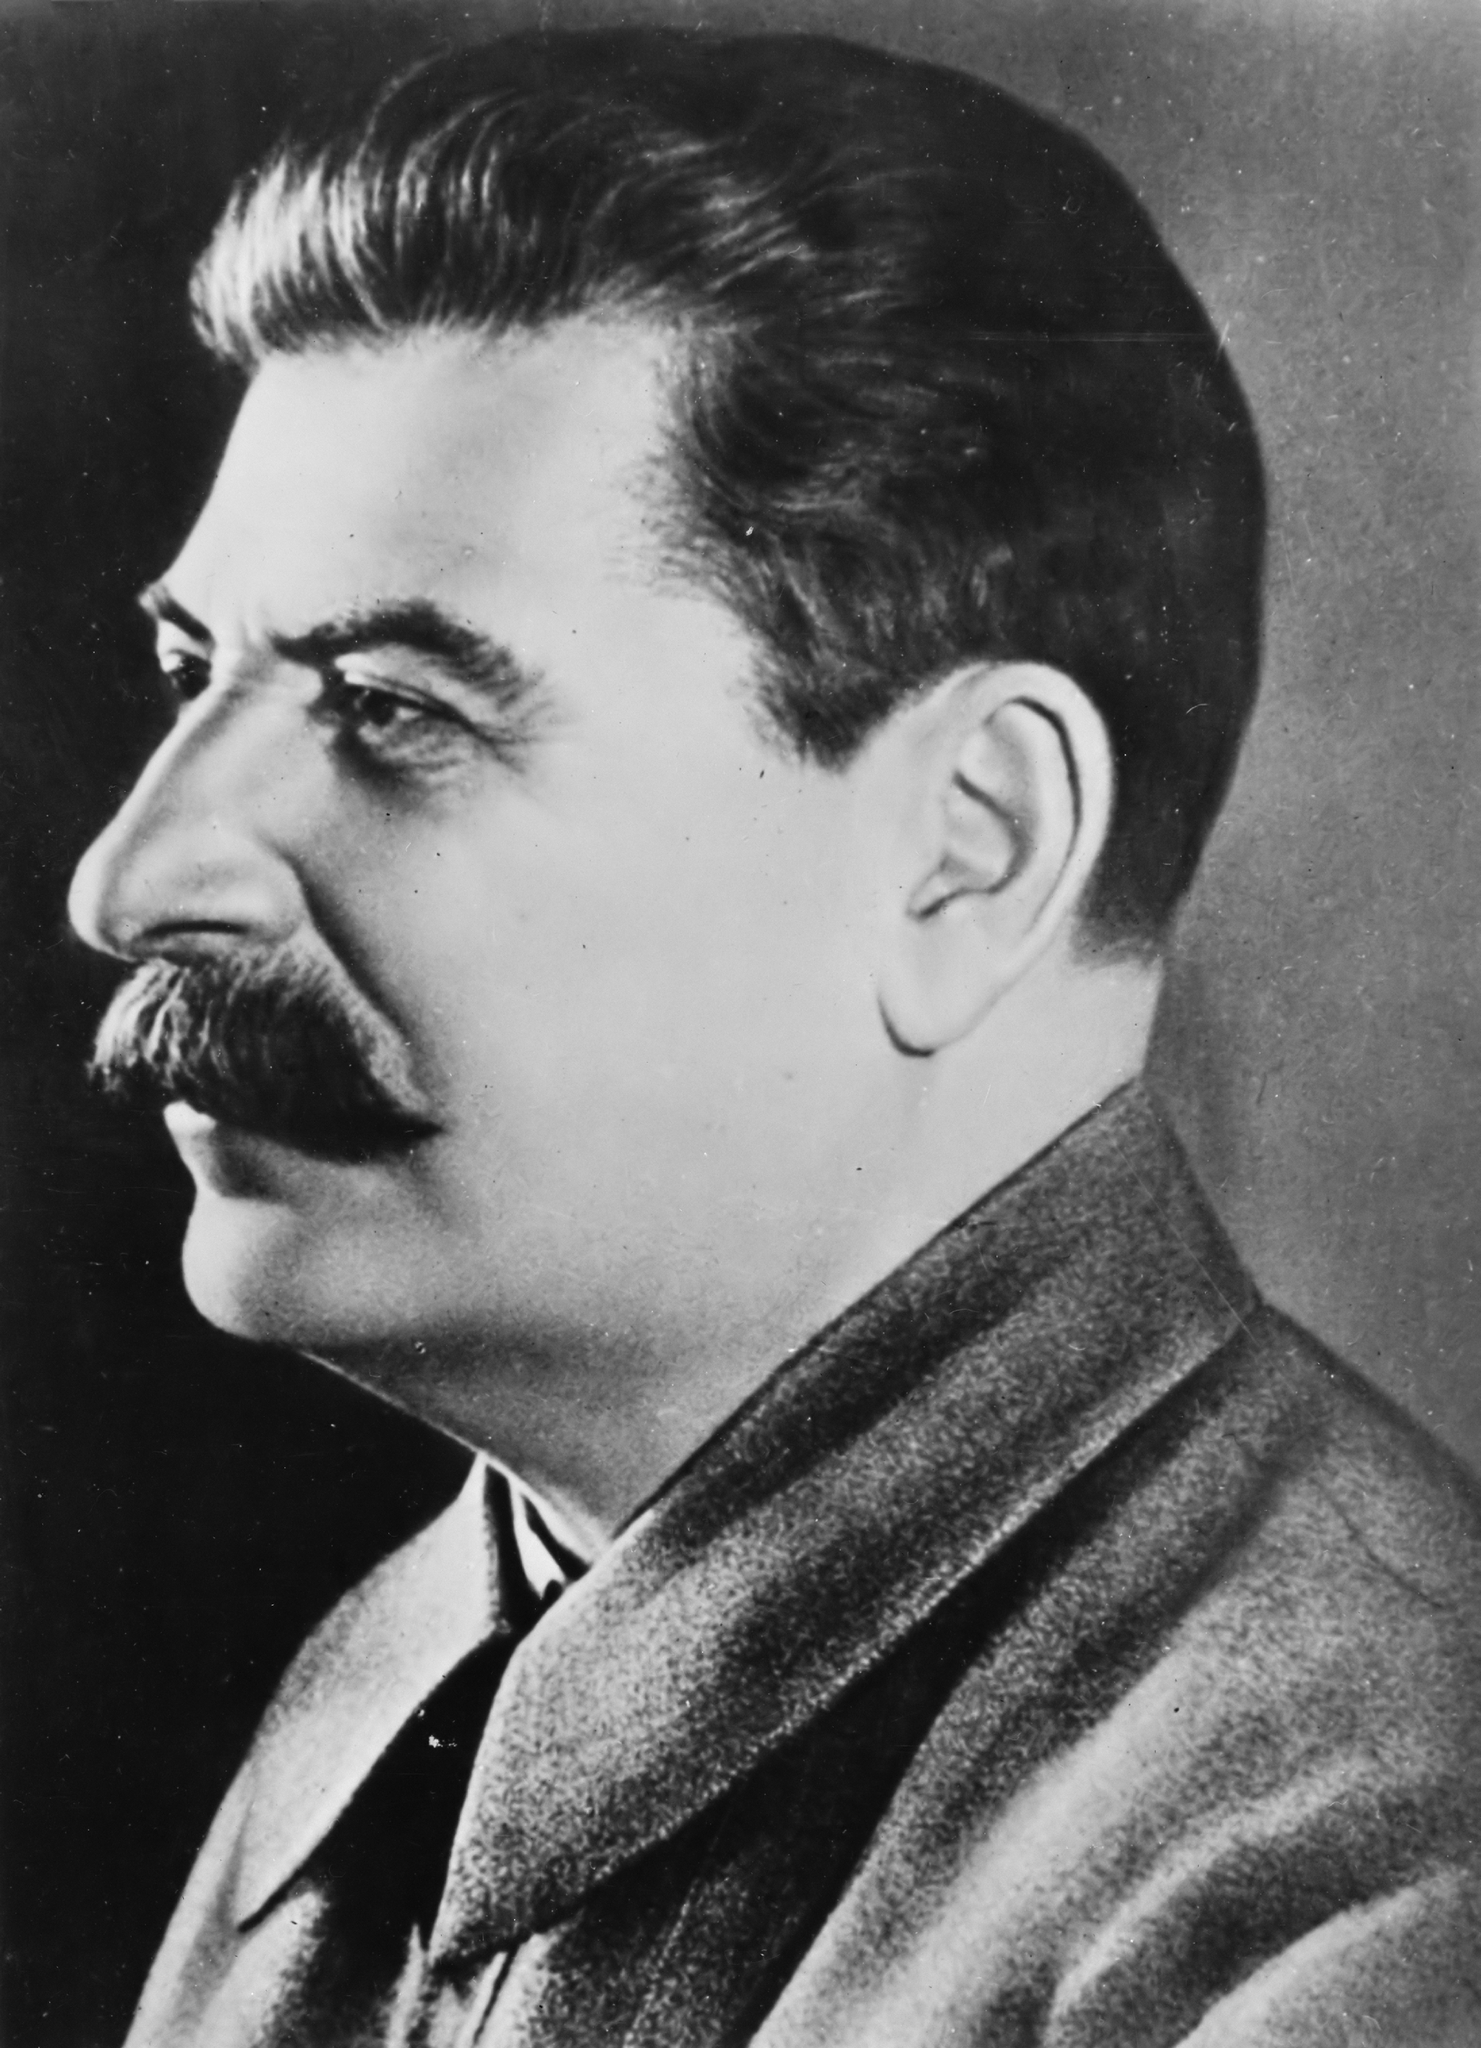 "I believe in one thing only, the power of human will." <i>â€“Joseph Stalin (1878-1953, Soviet Union leader, responsible for the deaths of 20-60 million)</i>